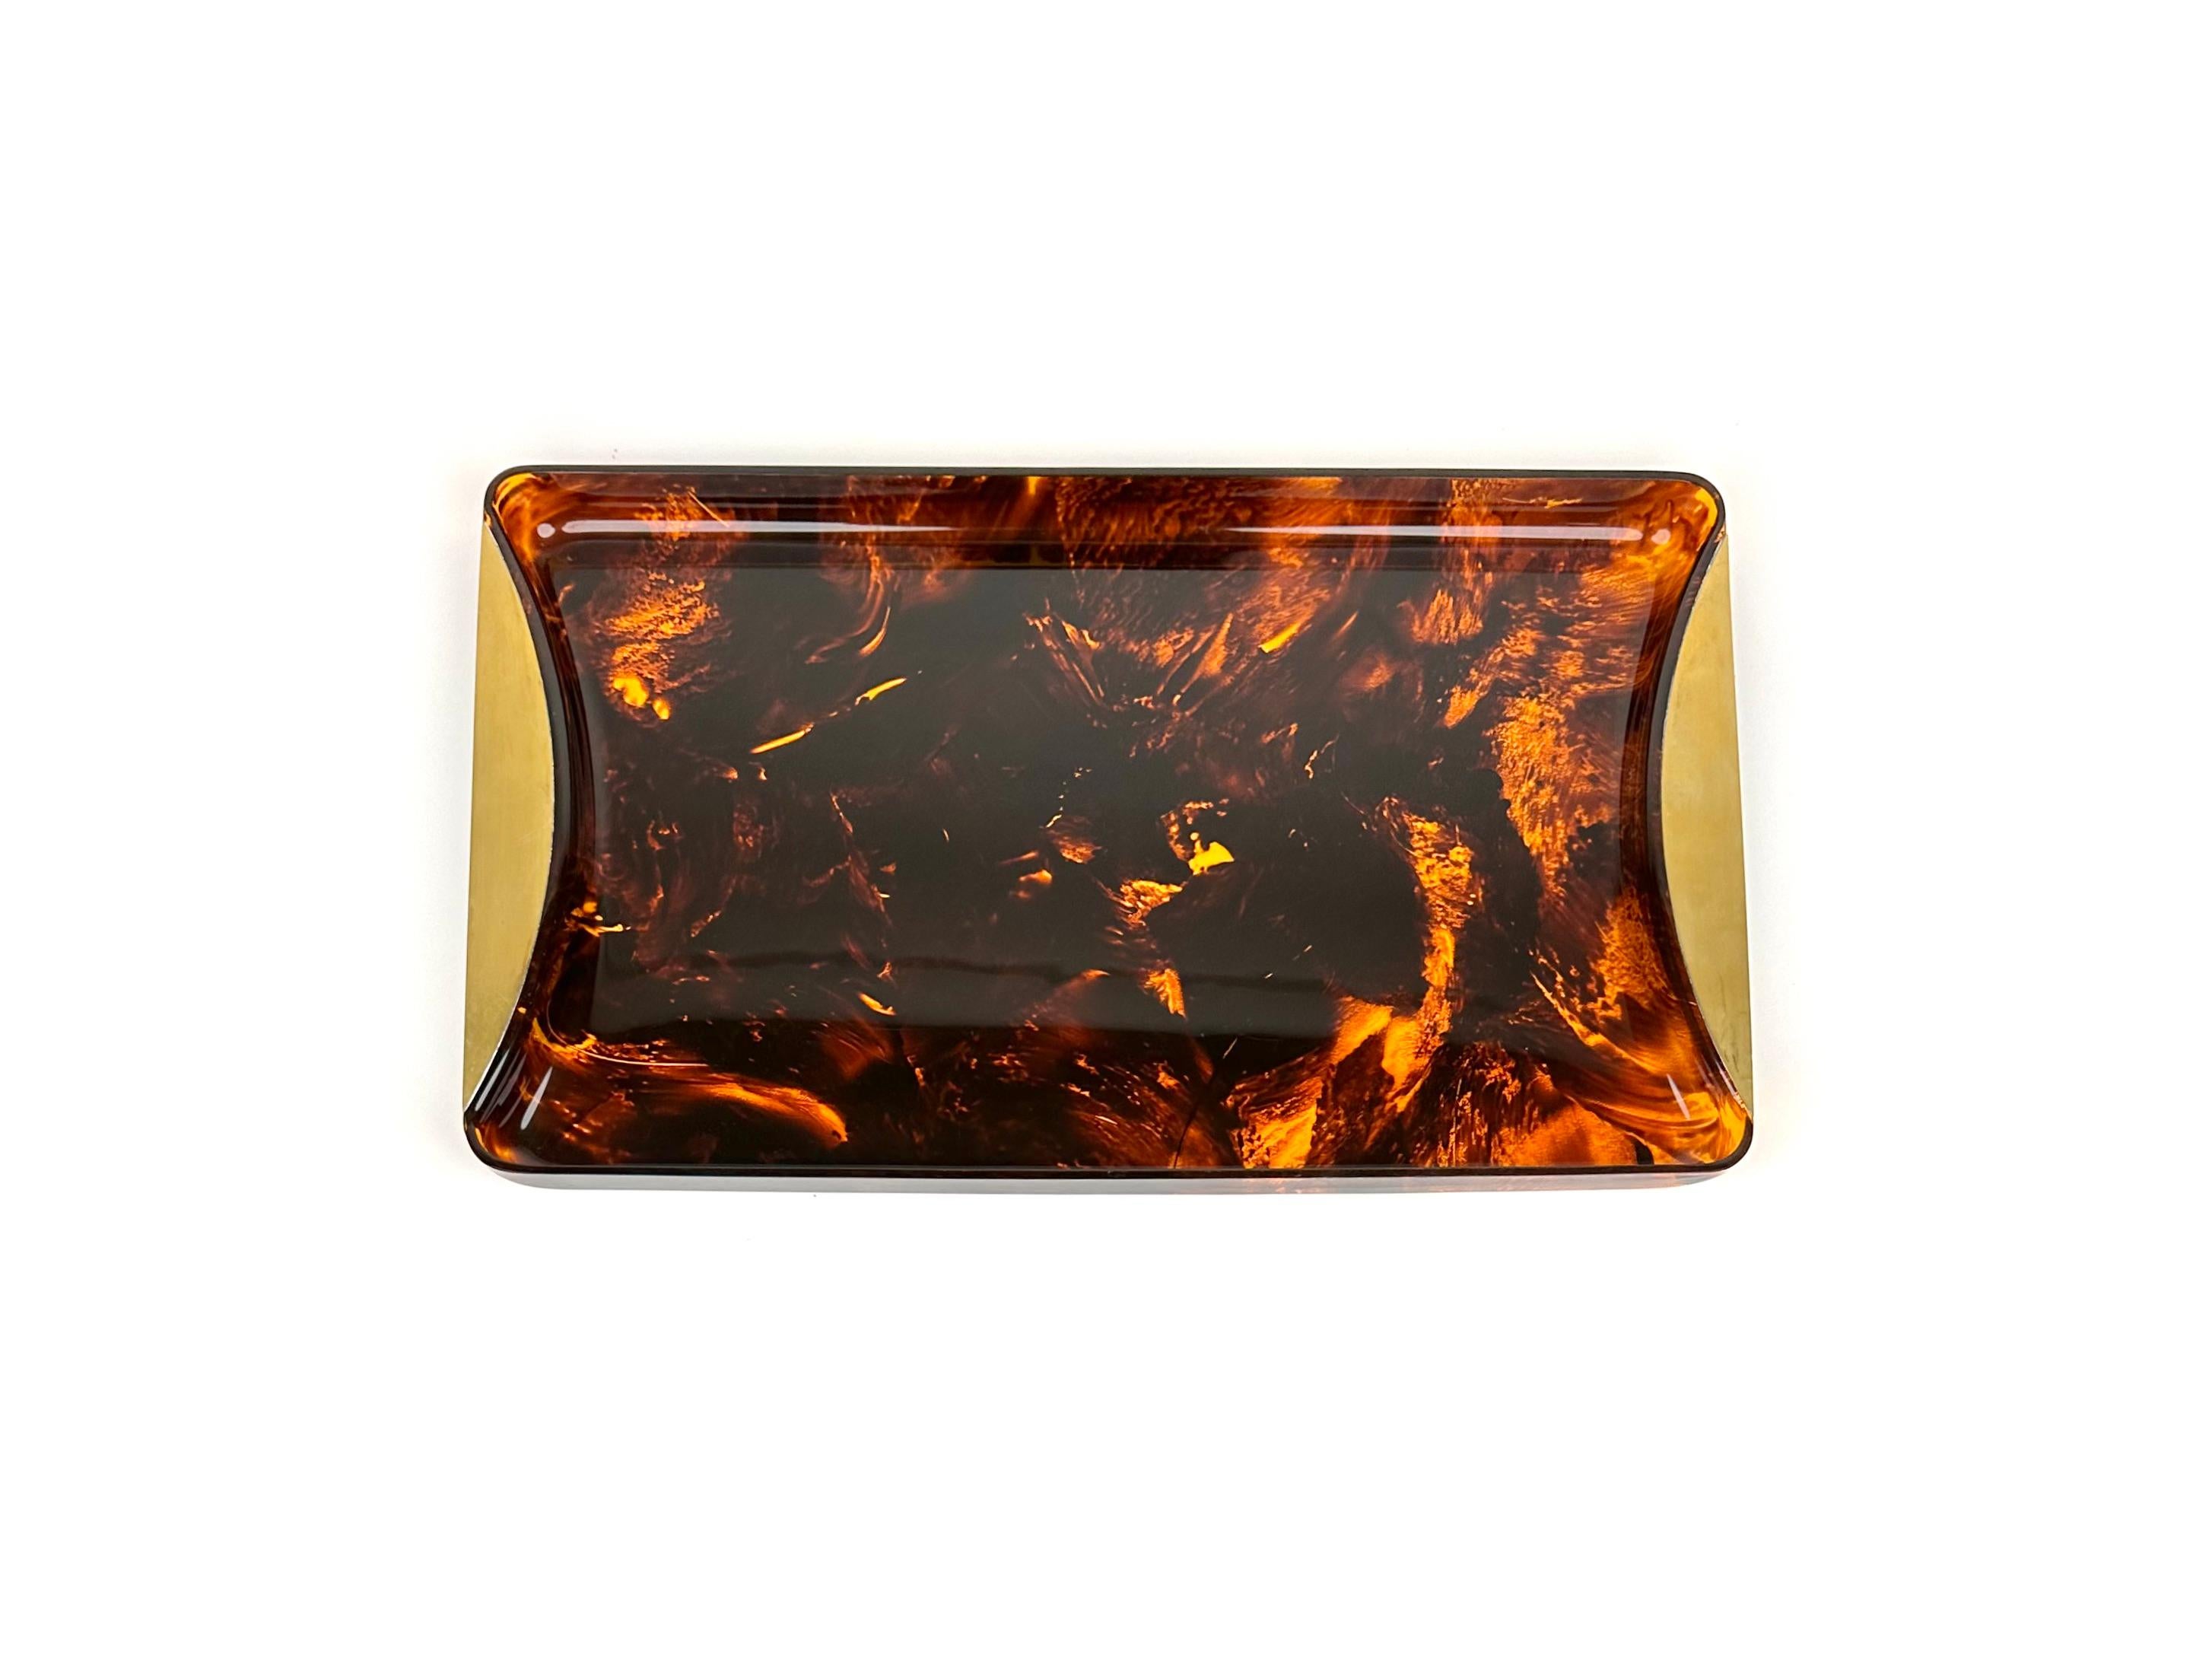 Italian Mid-Century Tortoiseshell Lucite & Brass Serving Tray by Guzzini, Italy, 1970s For Sale